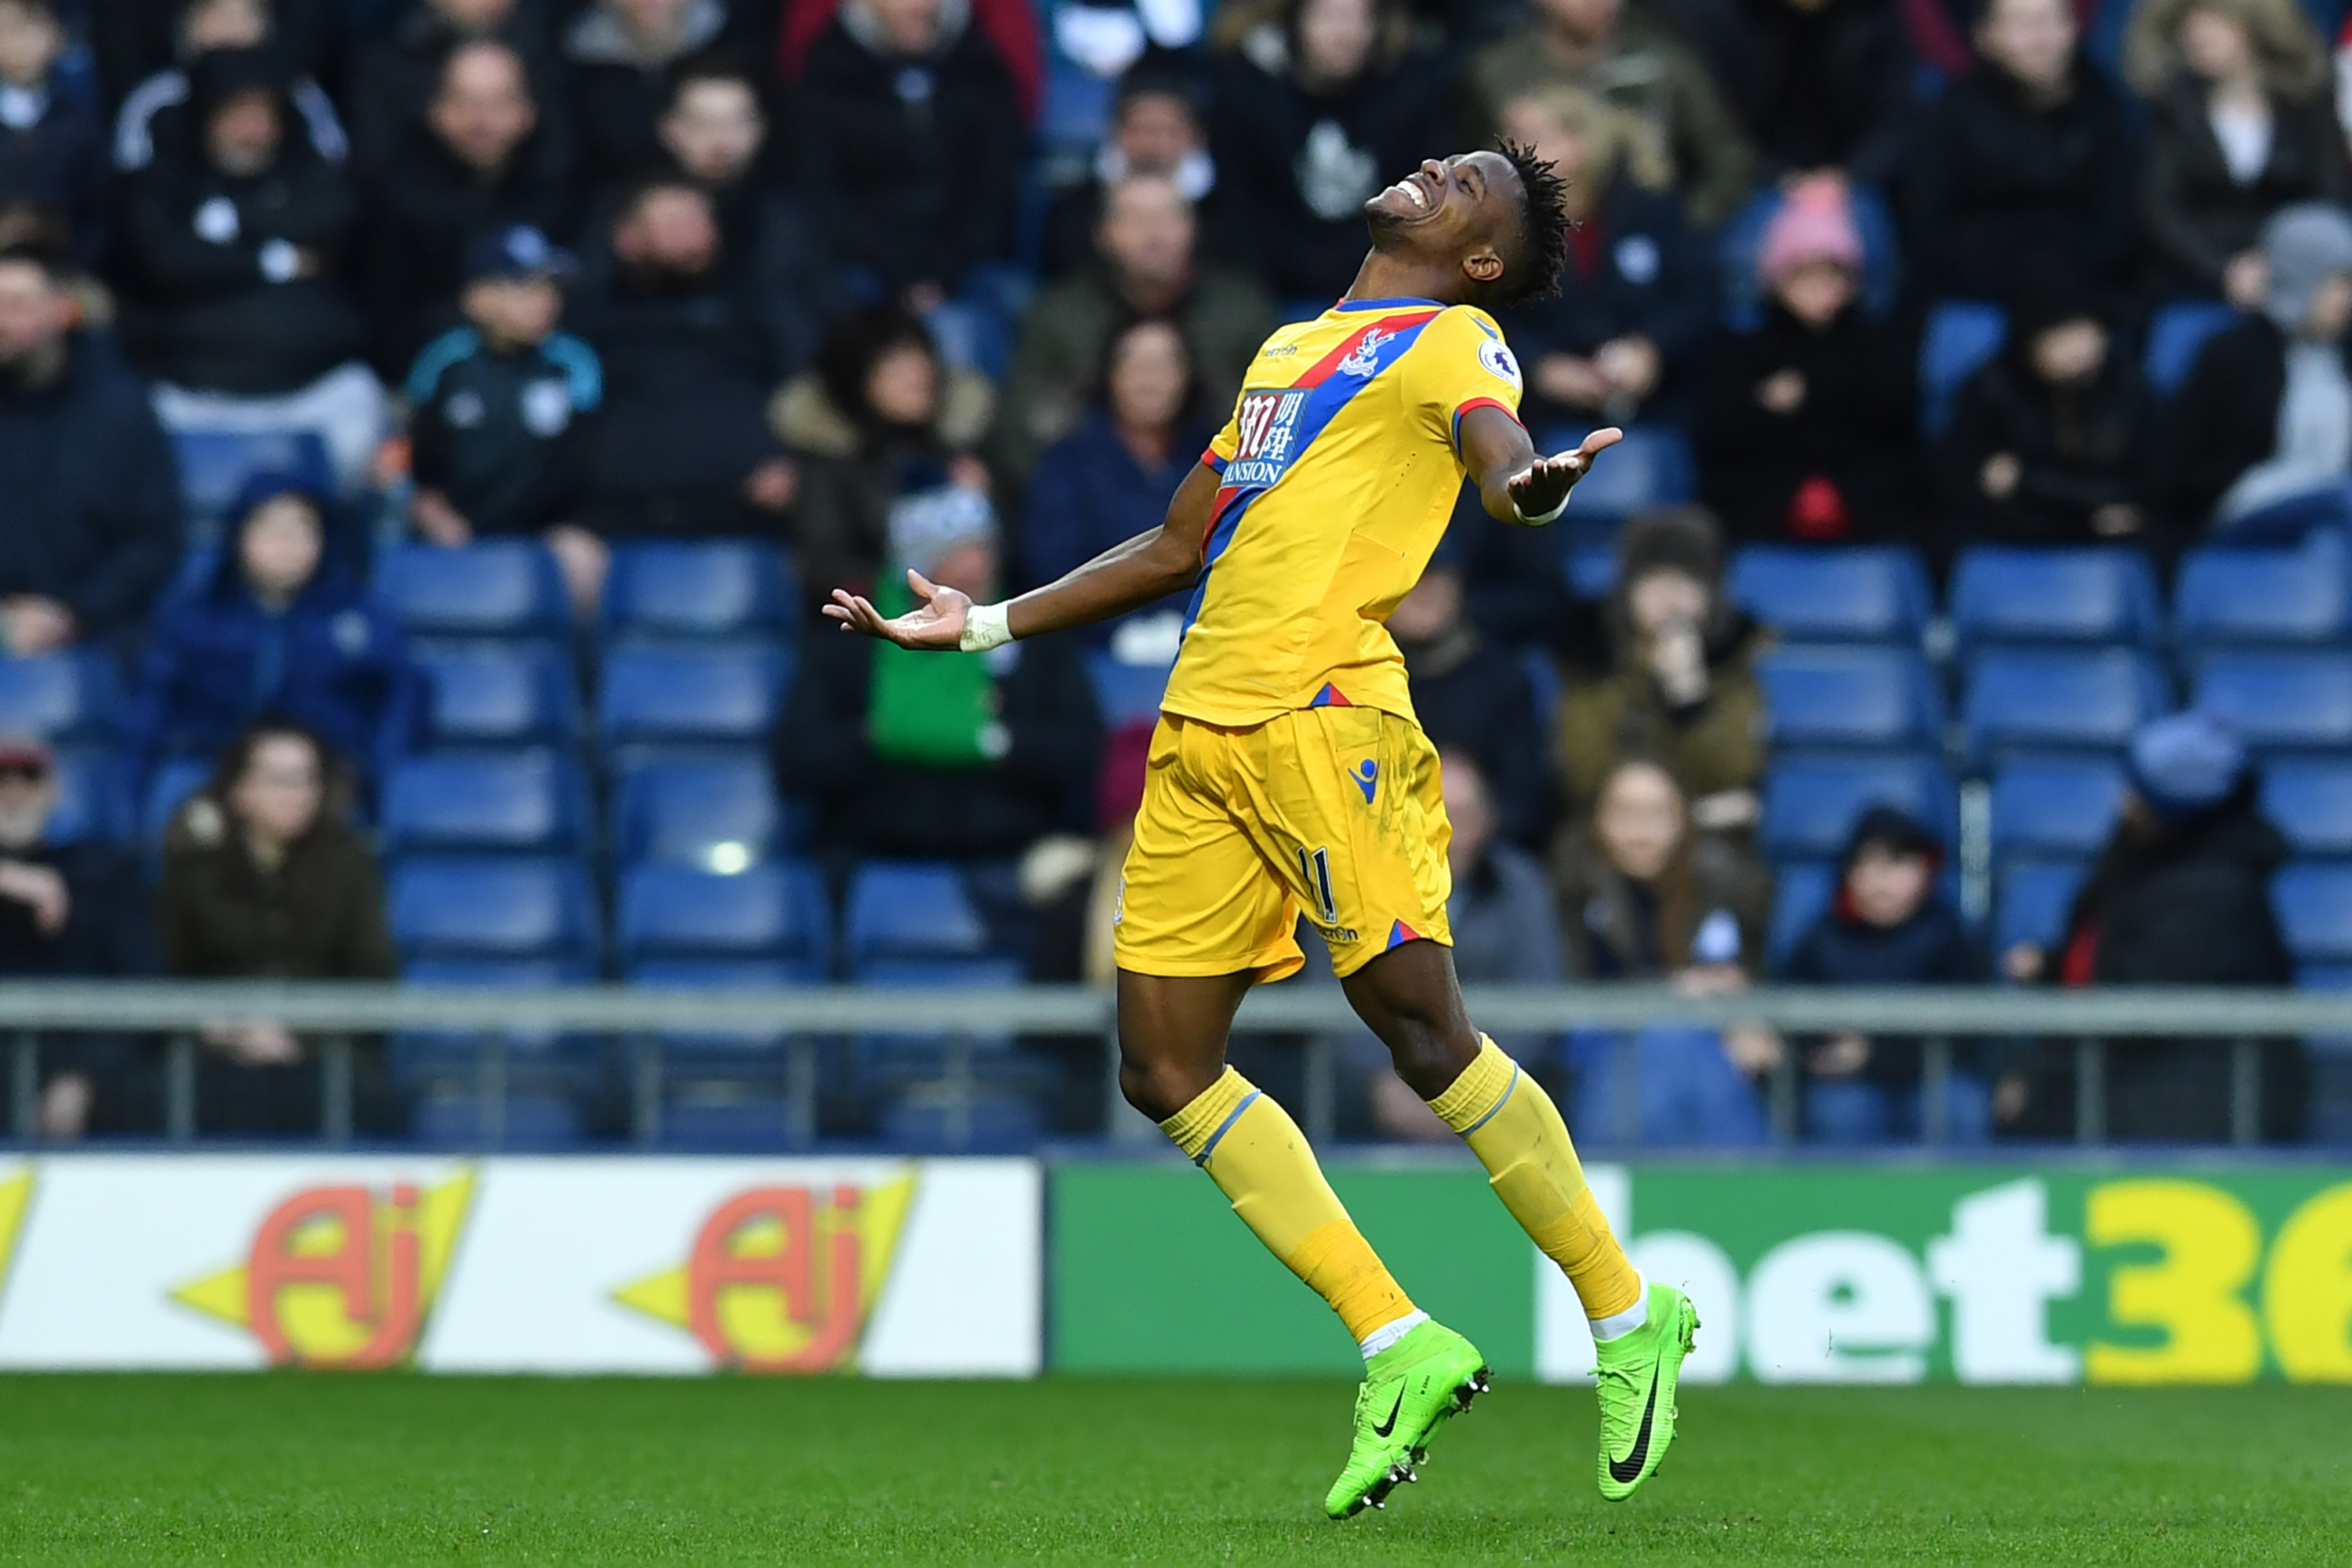 Crystal Palace's Ivorian-born English striker Wilfried Zaha celebrates after scoring the opening goal of the English Premier League football match between West Bromwich Albion and Crystal Palace at The Hawthorns stadium in West Bromwich, central England, on March 4, 2017.
 / AFP PHOTO / Ben STANSALL / RESTRICTED TO EDITORIAL USE. No use with unauthorized audio, video, data, fixture lists, club/league logos or 'live' services. Online in-match use limited to 75 images, no video emulation. No use in betting, games or single club/league/player publications.  /         (Photo credit should read BEN STANSALL/AFP/Getty Images)